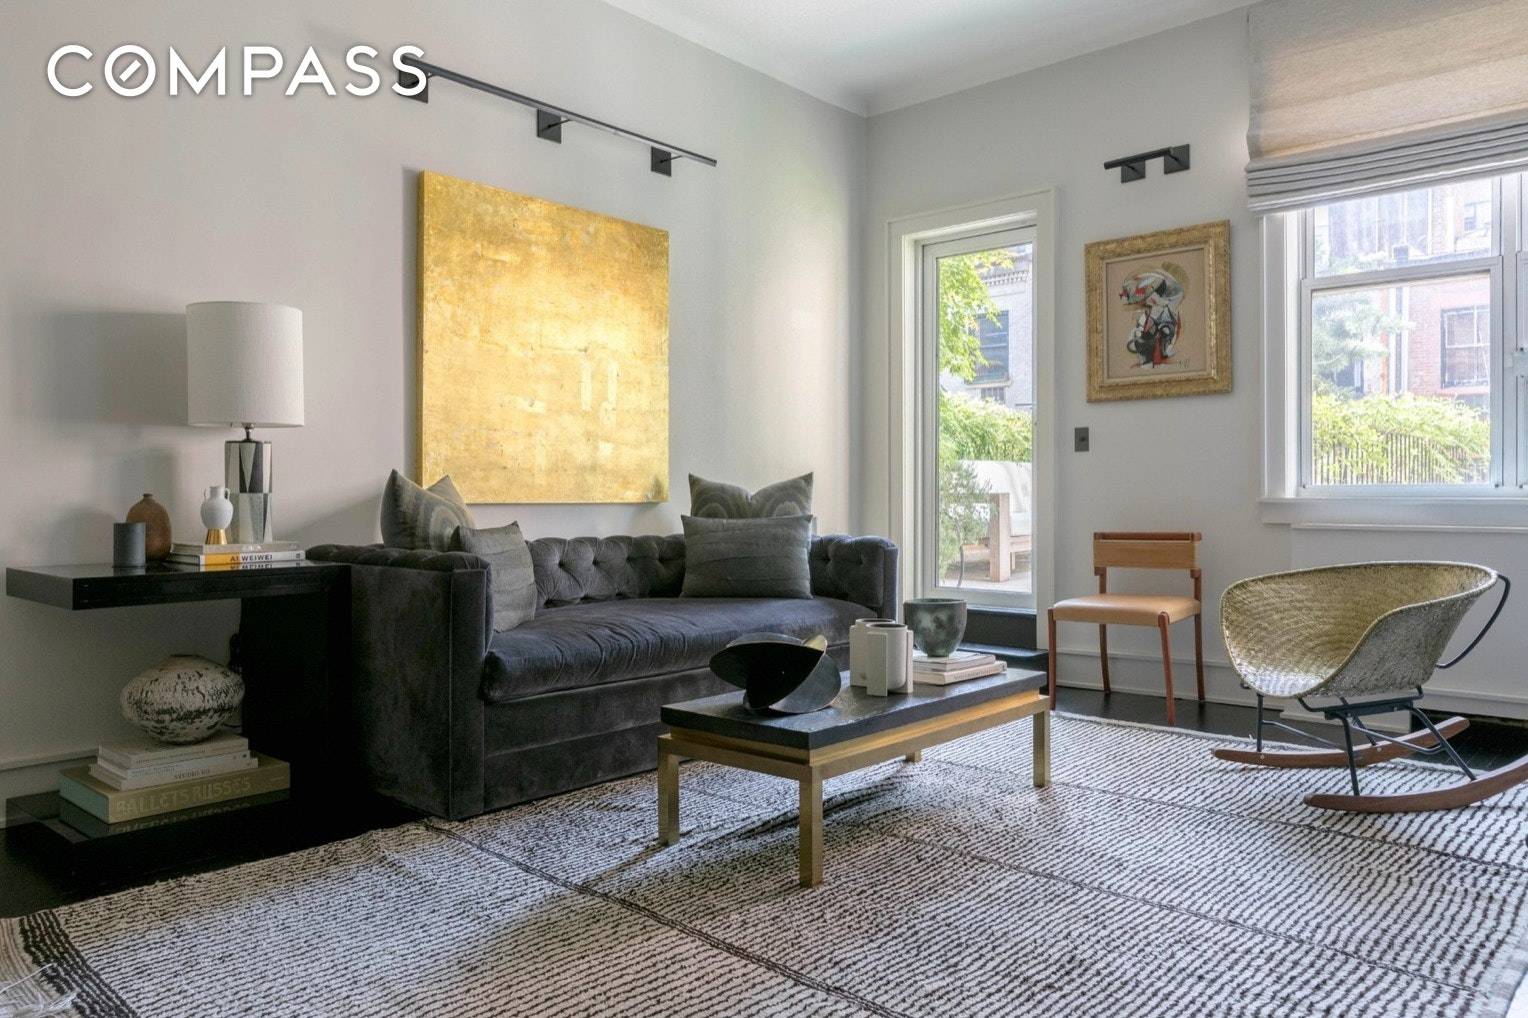 A unique opportunity to rent a designer FURNISHED apartment with a private terrace off Park Avenue.